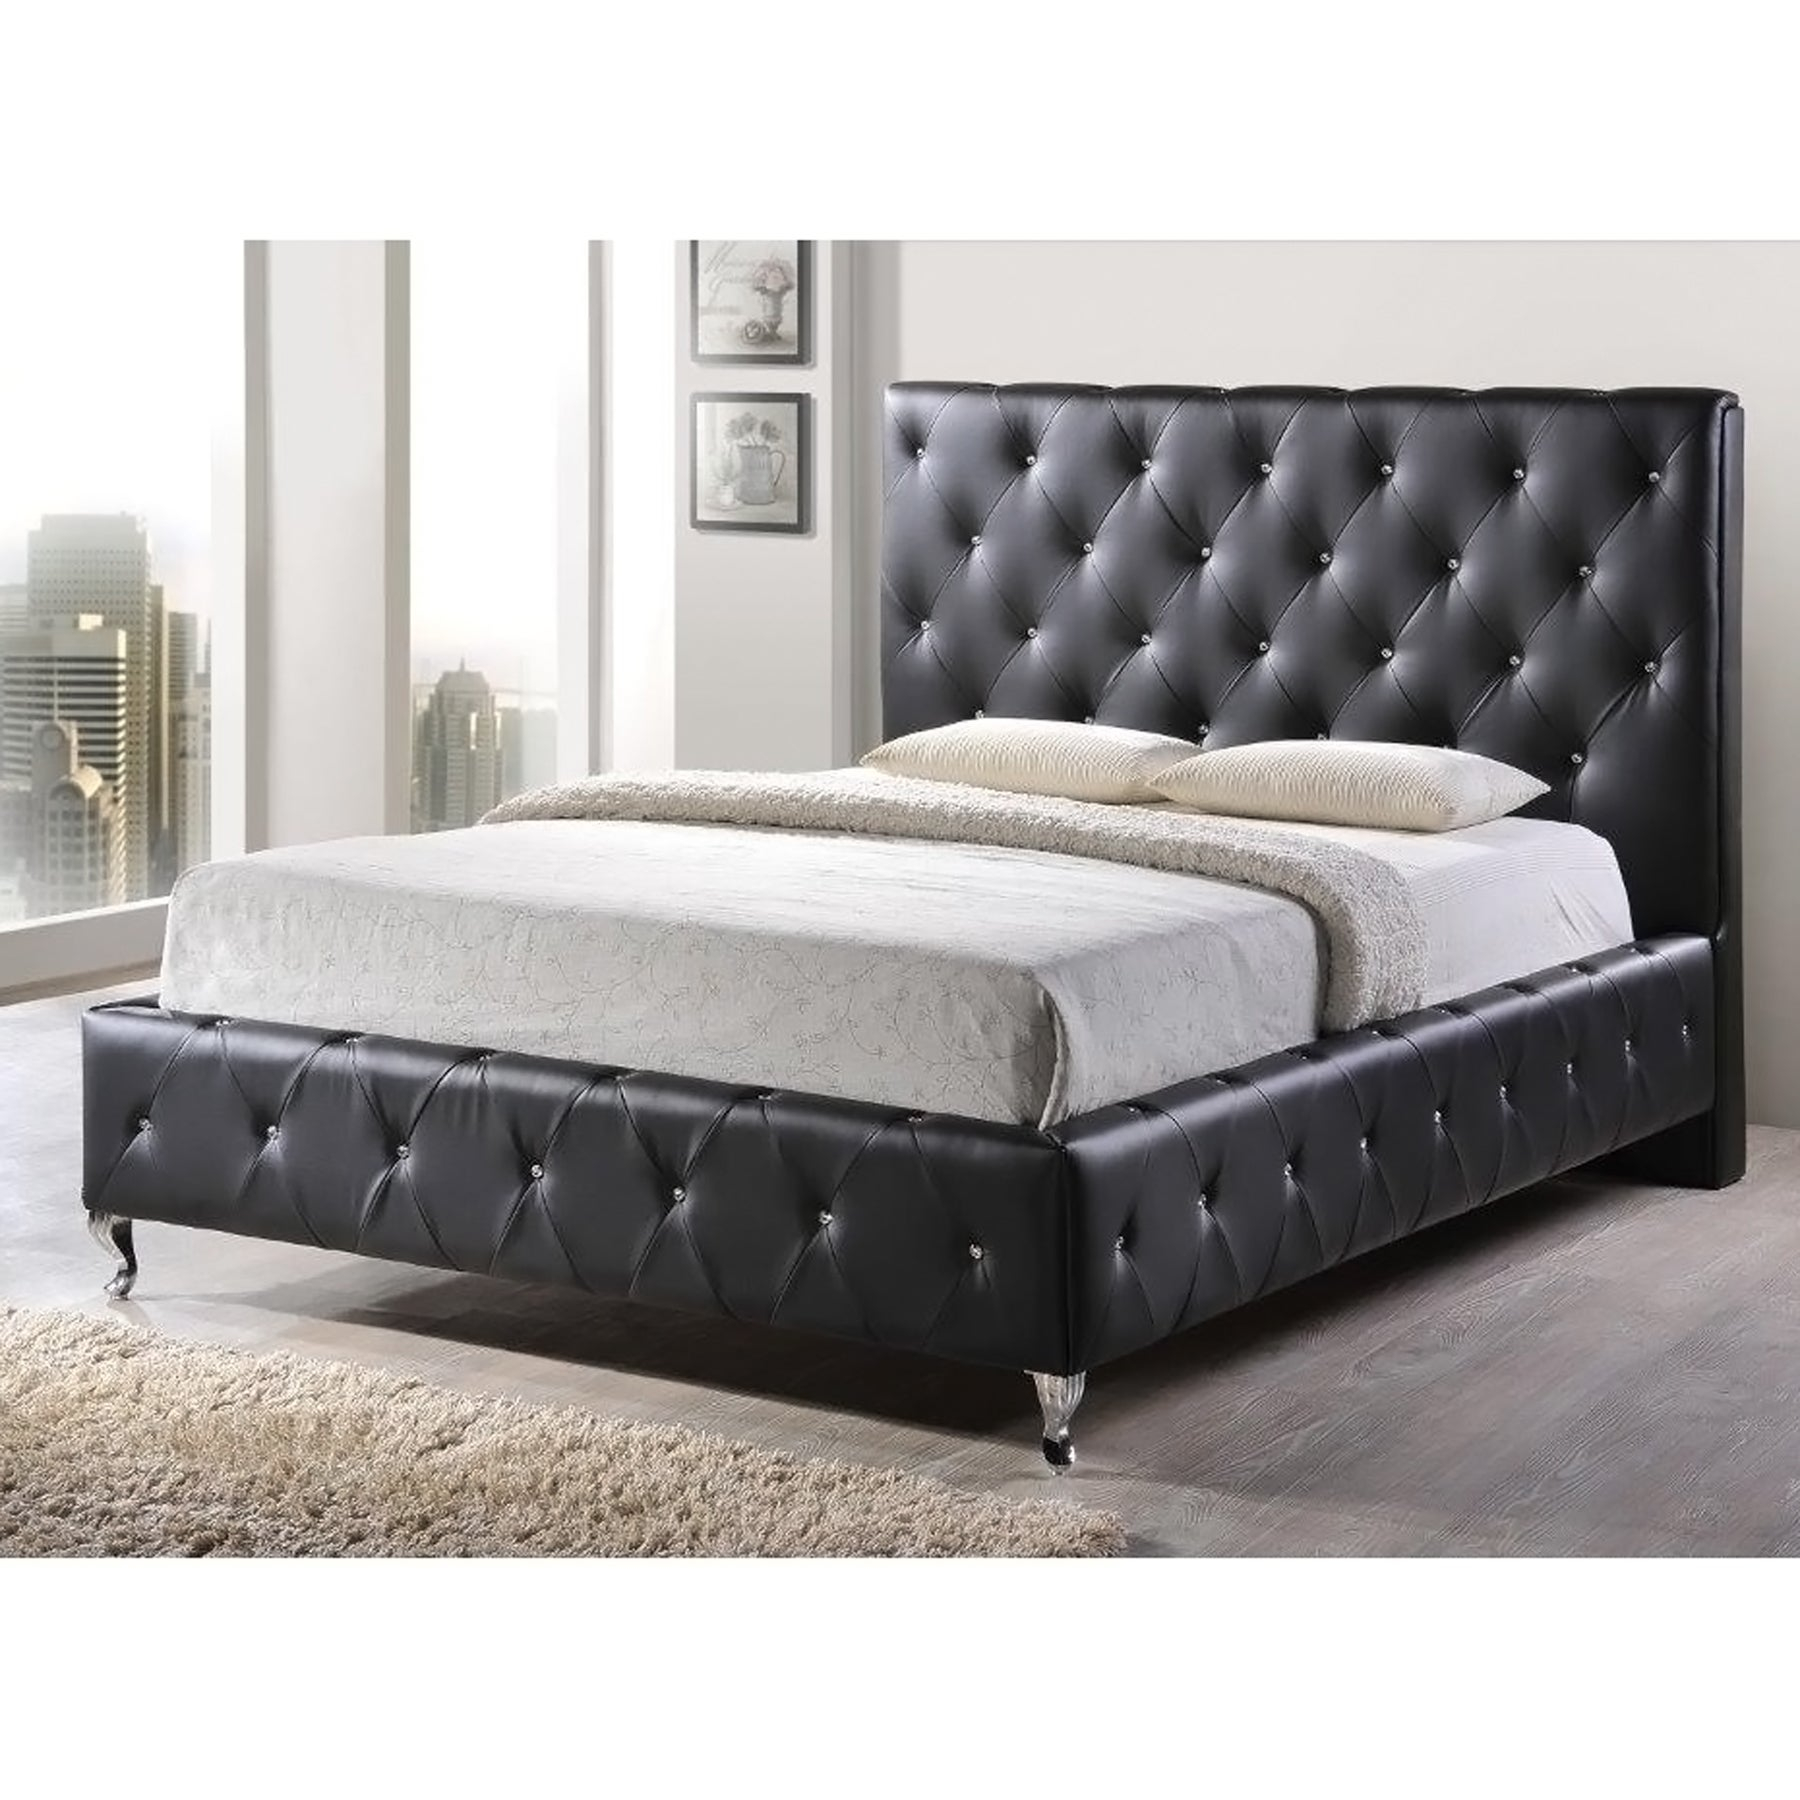 Baxton Studio Stella Crystal Tufted Black Modern Bed With Upholstered Headboard in dimensions 1800 X 1800